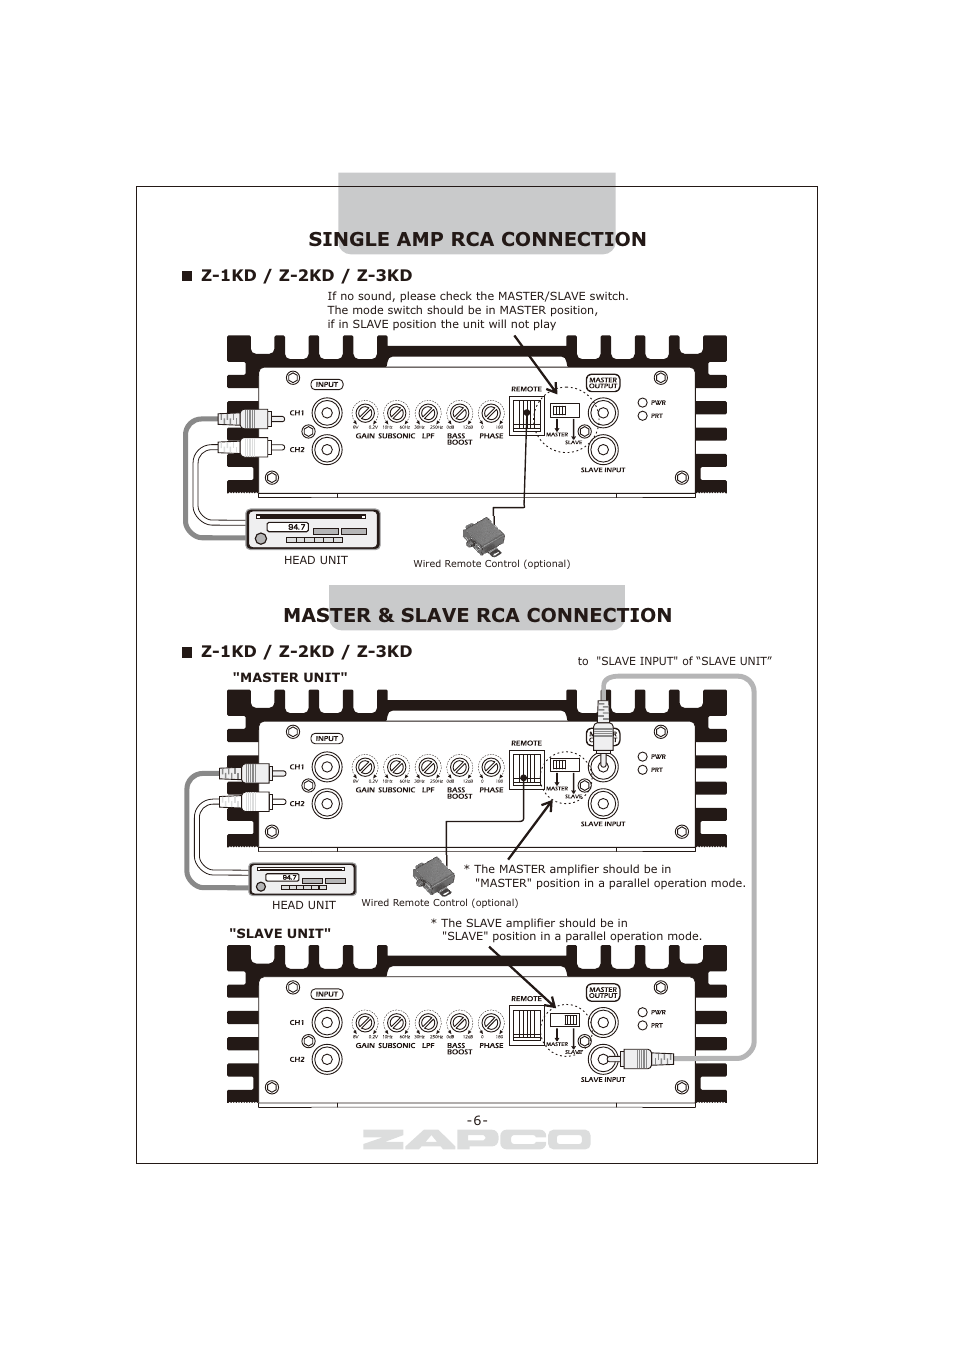 Single amp rca connection, Master & slave rca connection | Zapco Z-series D User Manual | Page 7 / 12